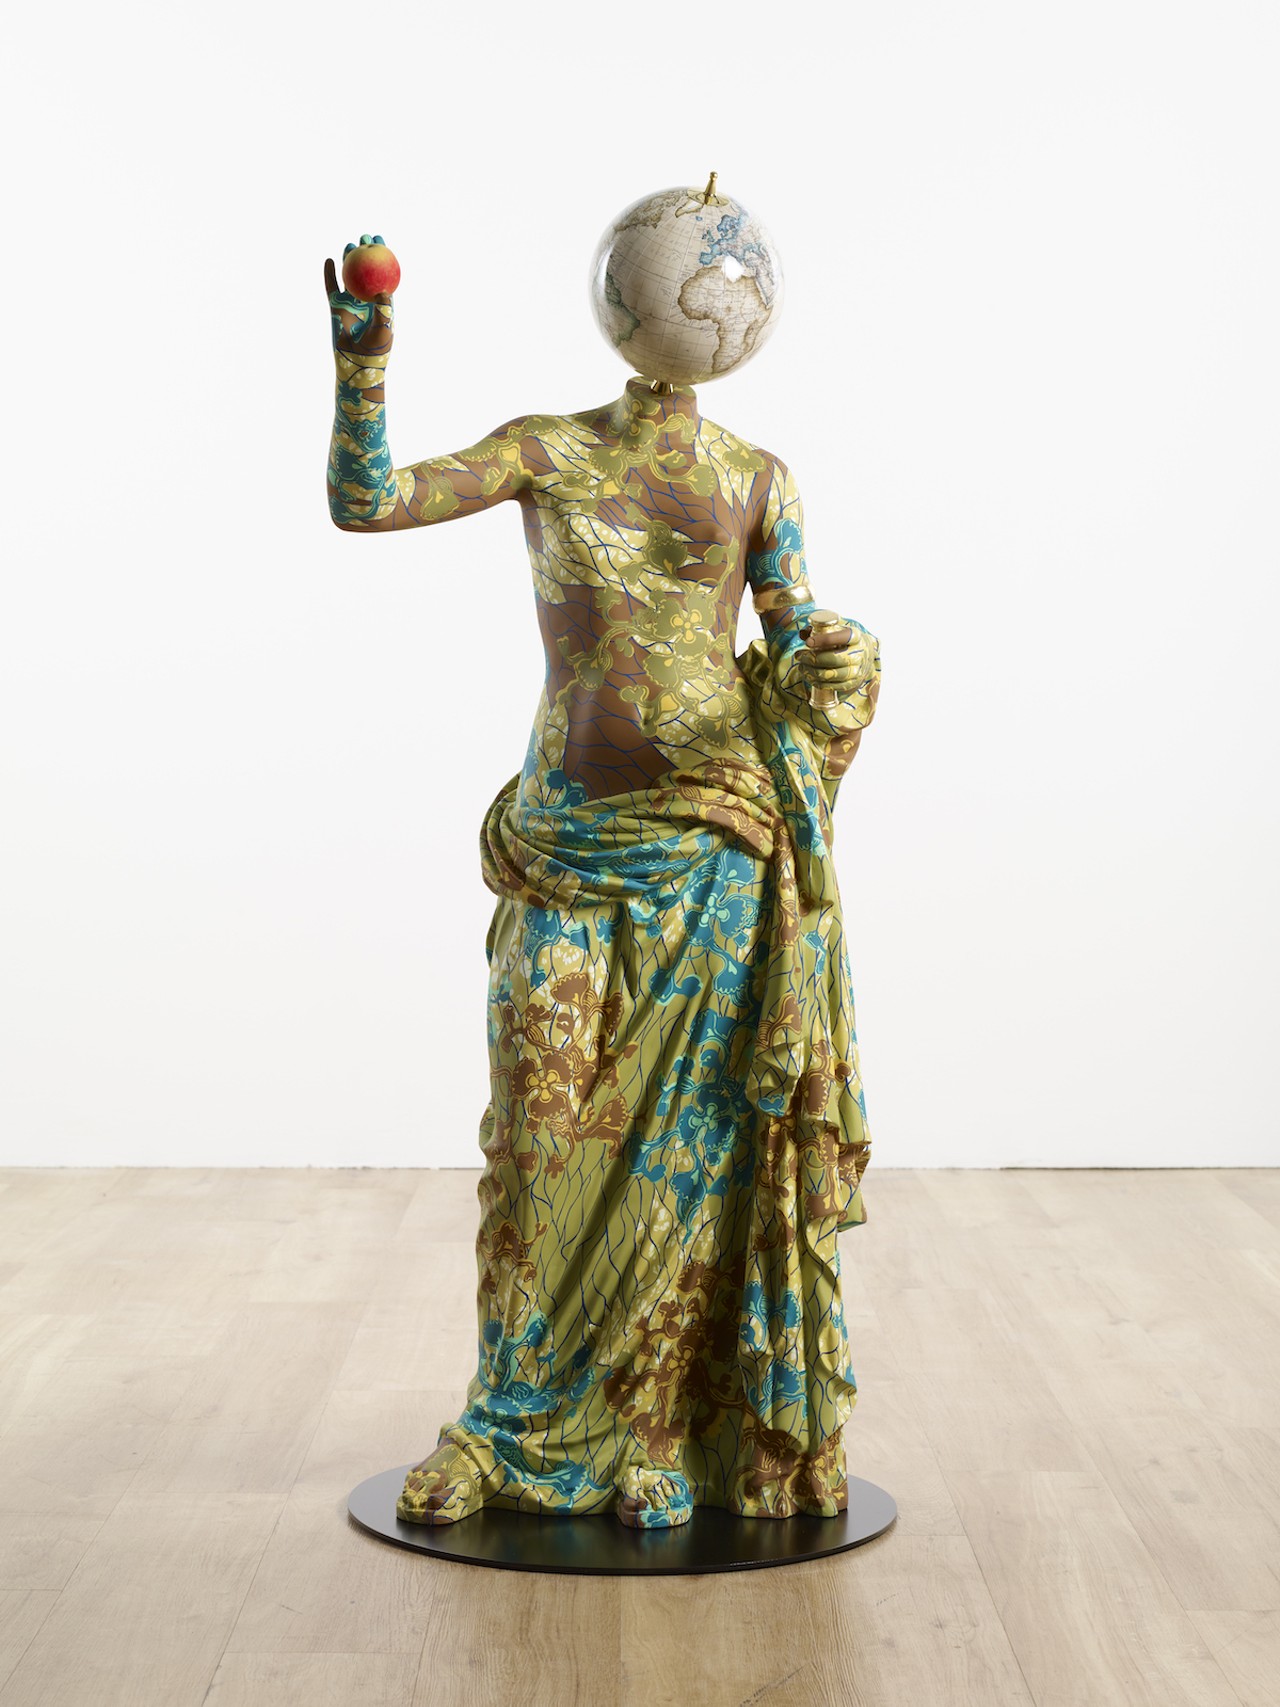 Yinka Shonibare
CBE
(Bri
tish, b. 1962)
Venus de
Arles
, 2018
Unique Fiberglass sculpture, hand
painted with Dutch wax pattern, bespoke hand
-
colored globe and steel baseplate
54 ¼ x 24 x 24
inches
Jorge M. Pérez Collection, Miami. © Yinka
Shonibare
CBE. All Rights Reserved, DACS/ ARS, NY
2022